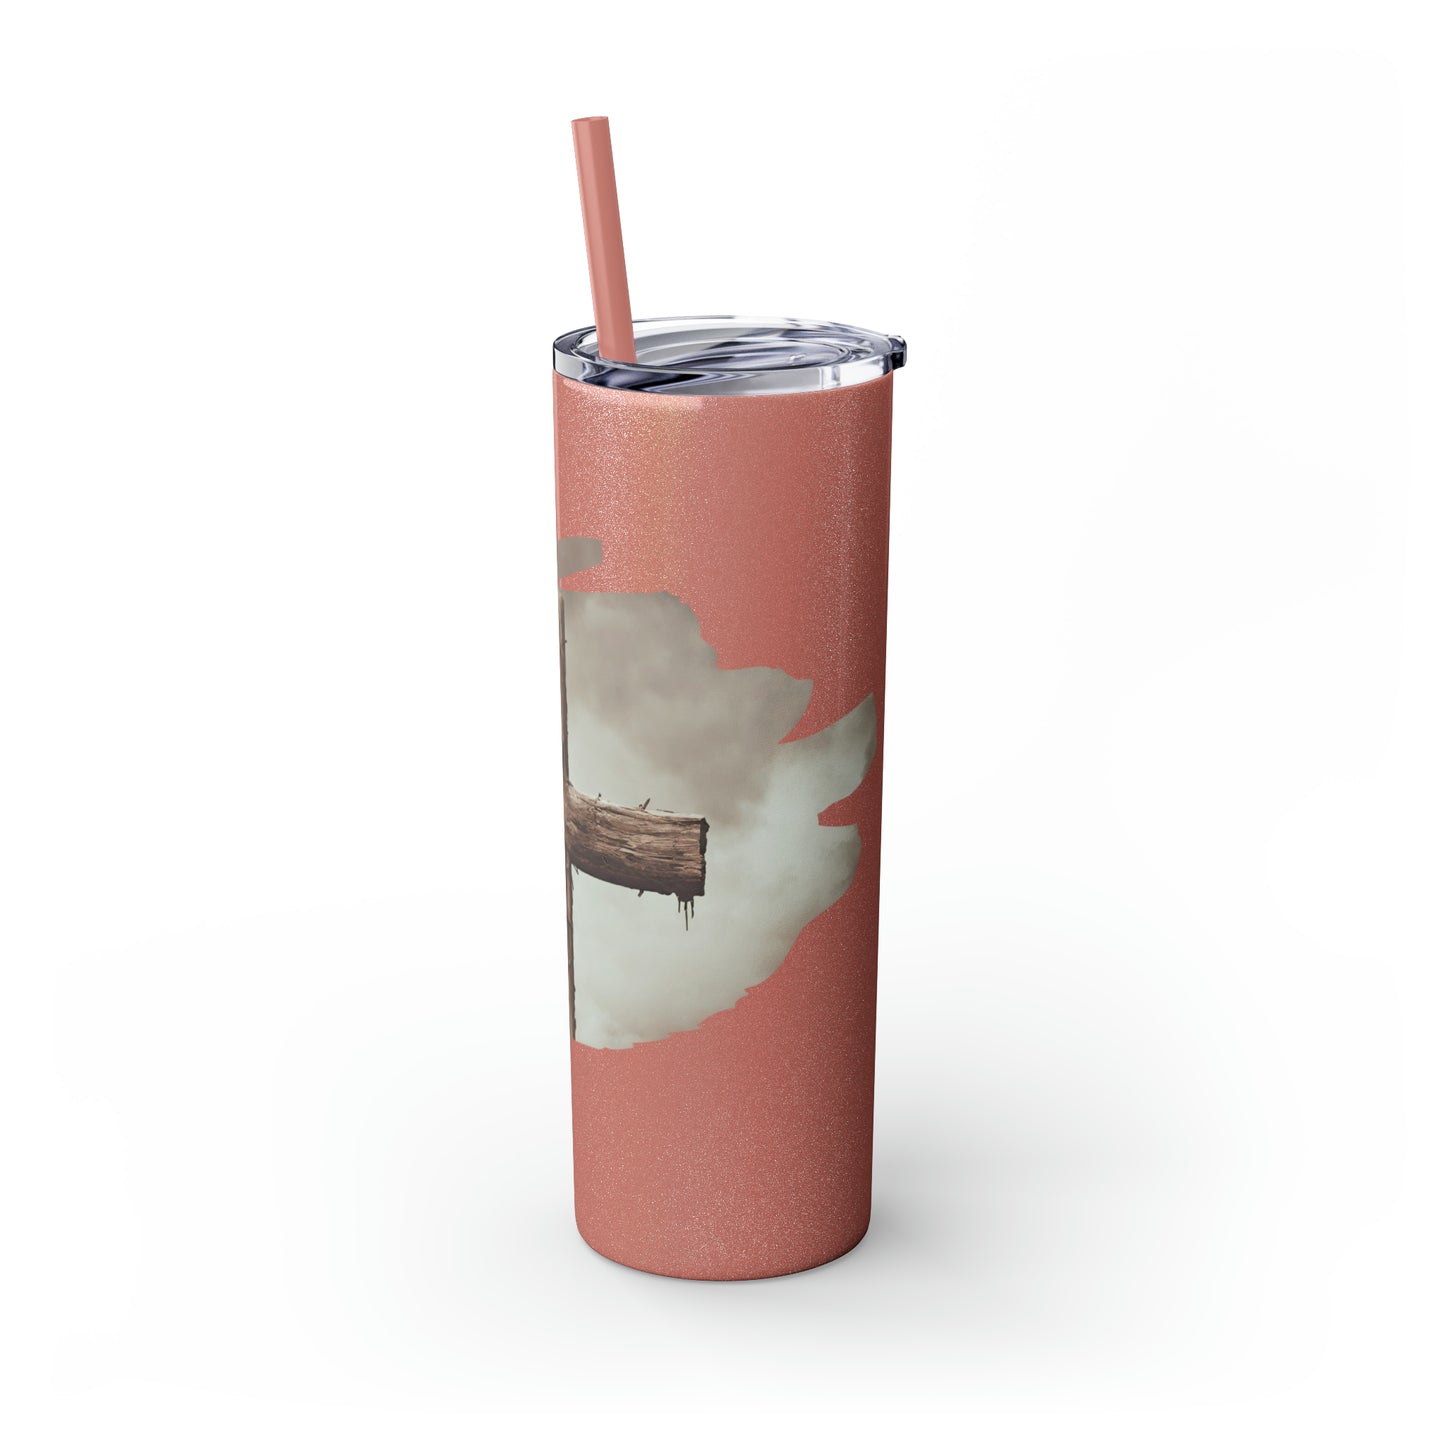 Our "Southern Sass" collection - Skinny Tumbler with Straw, 20oz